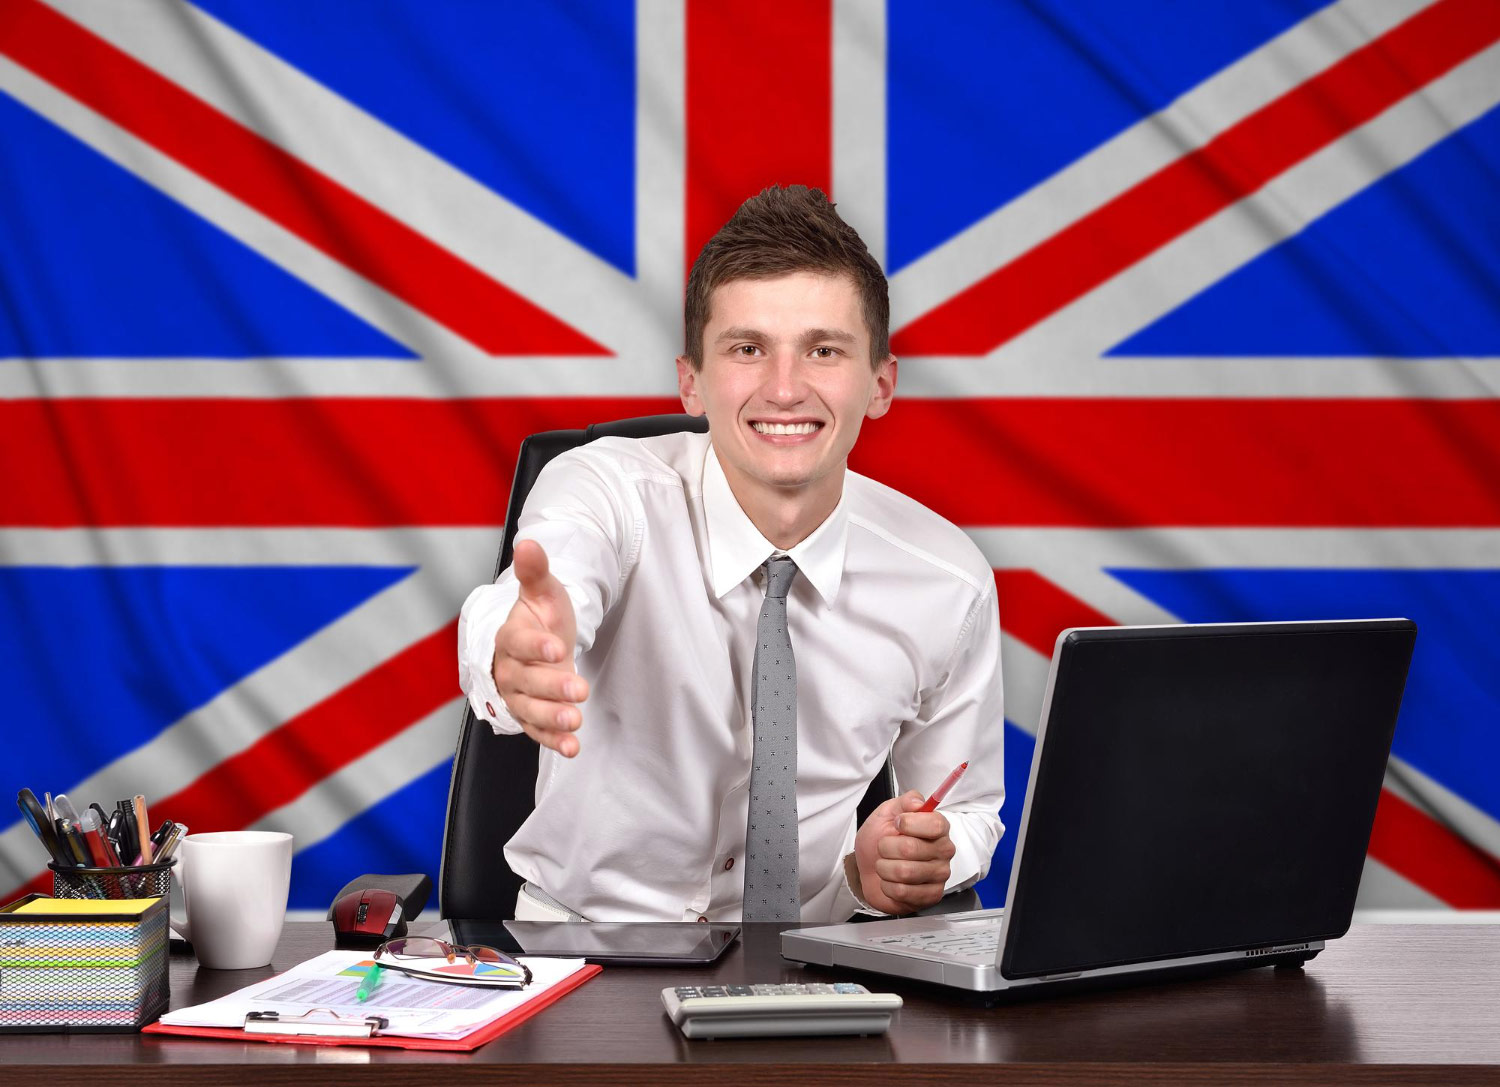 find jobs in the uk–job alert, Job Alert: Find Jobs Near You, Work from Home Jobs, Government Jobs, and More | UK Employment Opportunities